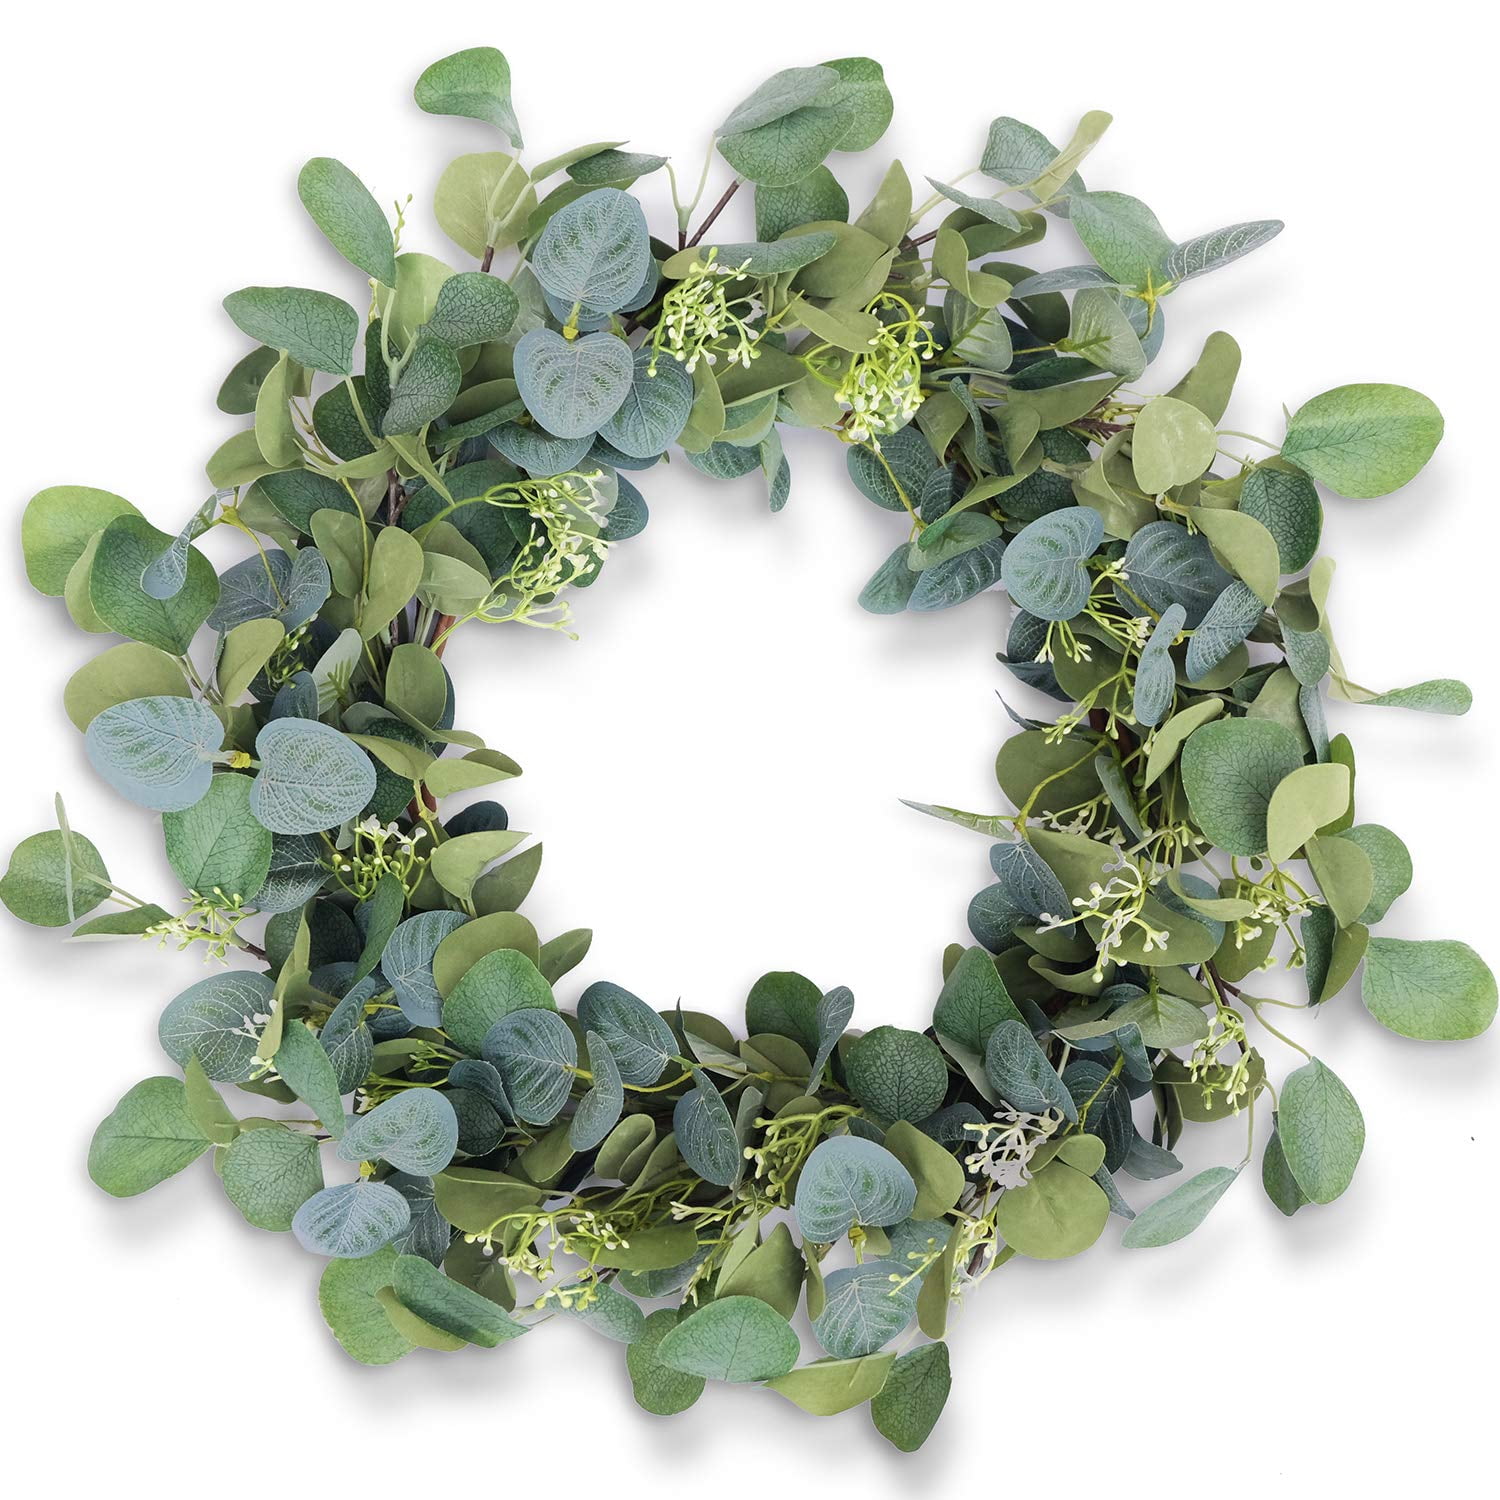 LIFEFAIR Green Eucalyptus Leaf Wreath 20 Inches Artificial Festival Celebration Wreath for Front Door Year Round